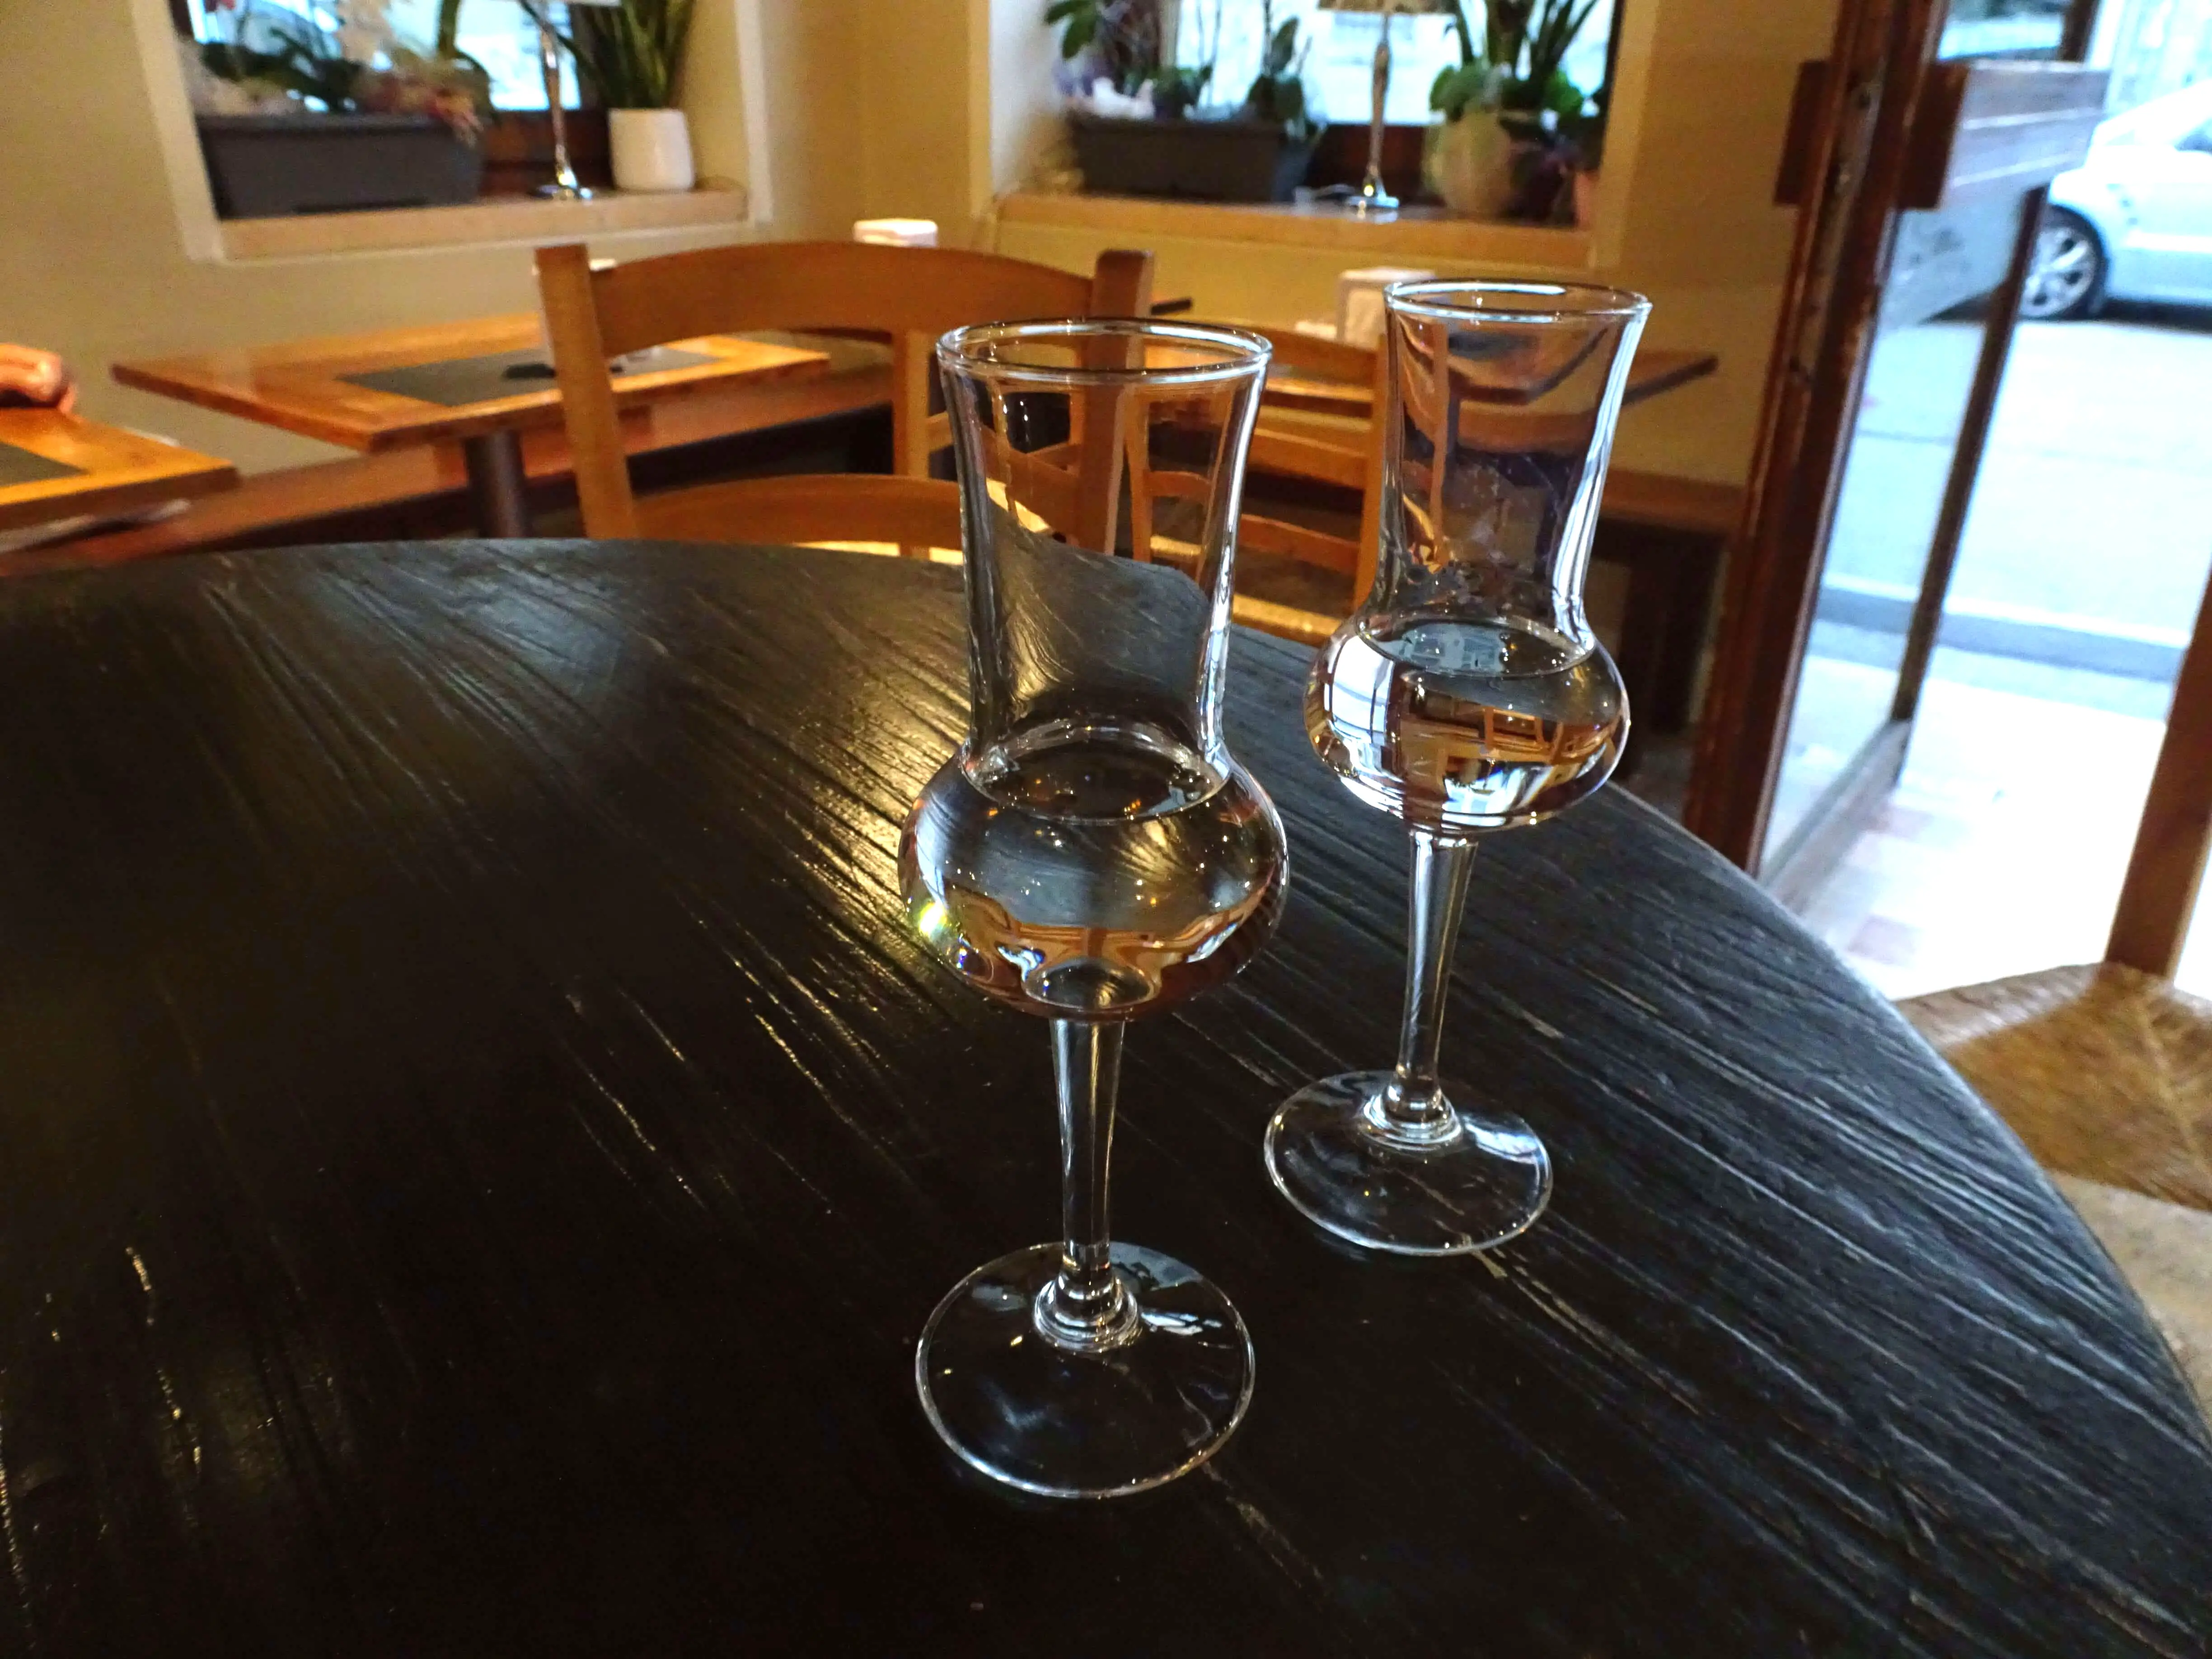 Two small glasses full of grappa